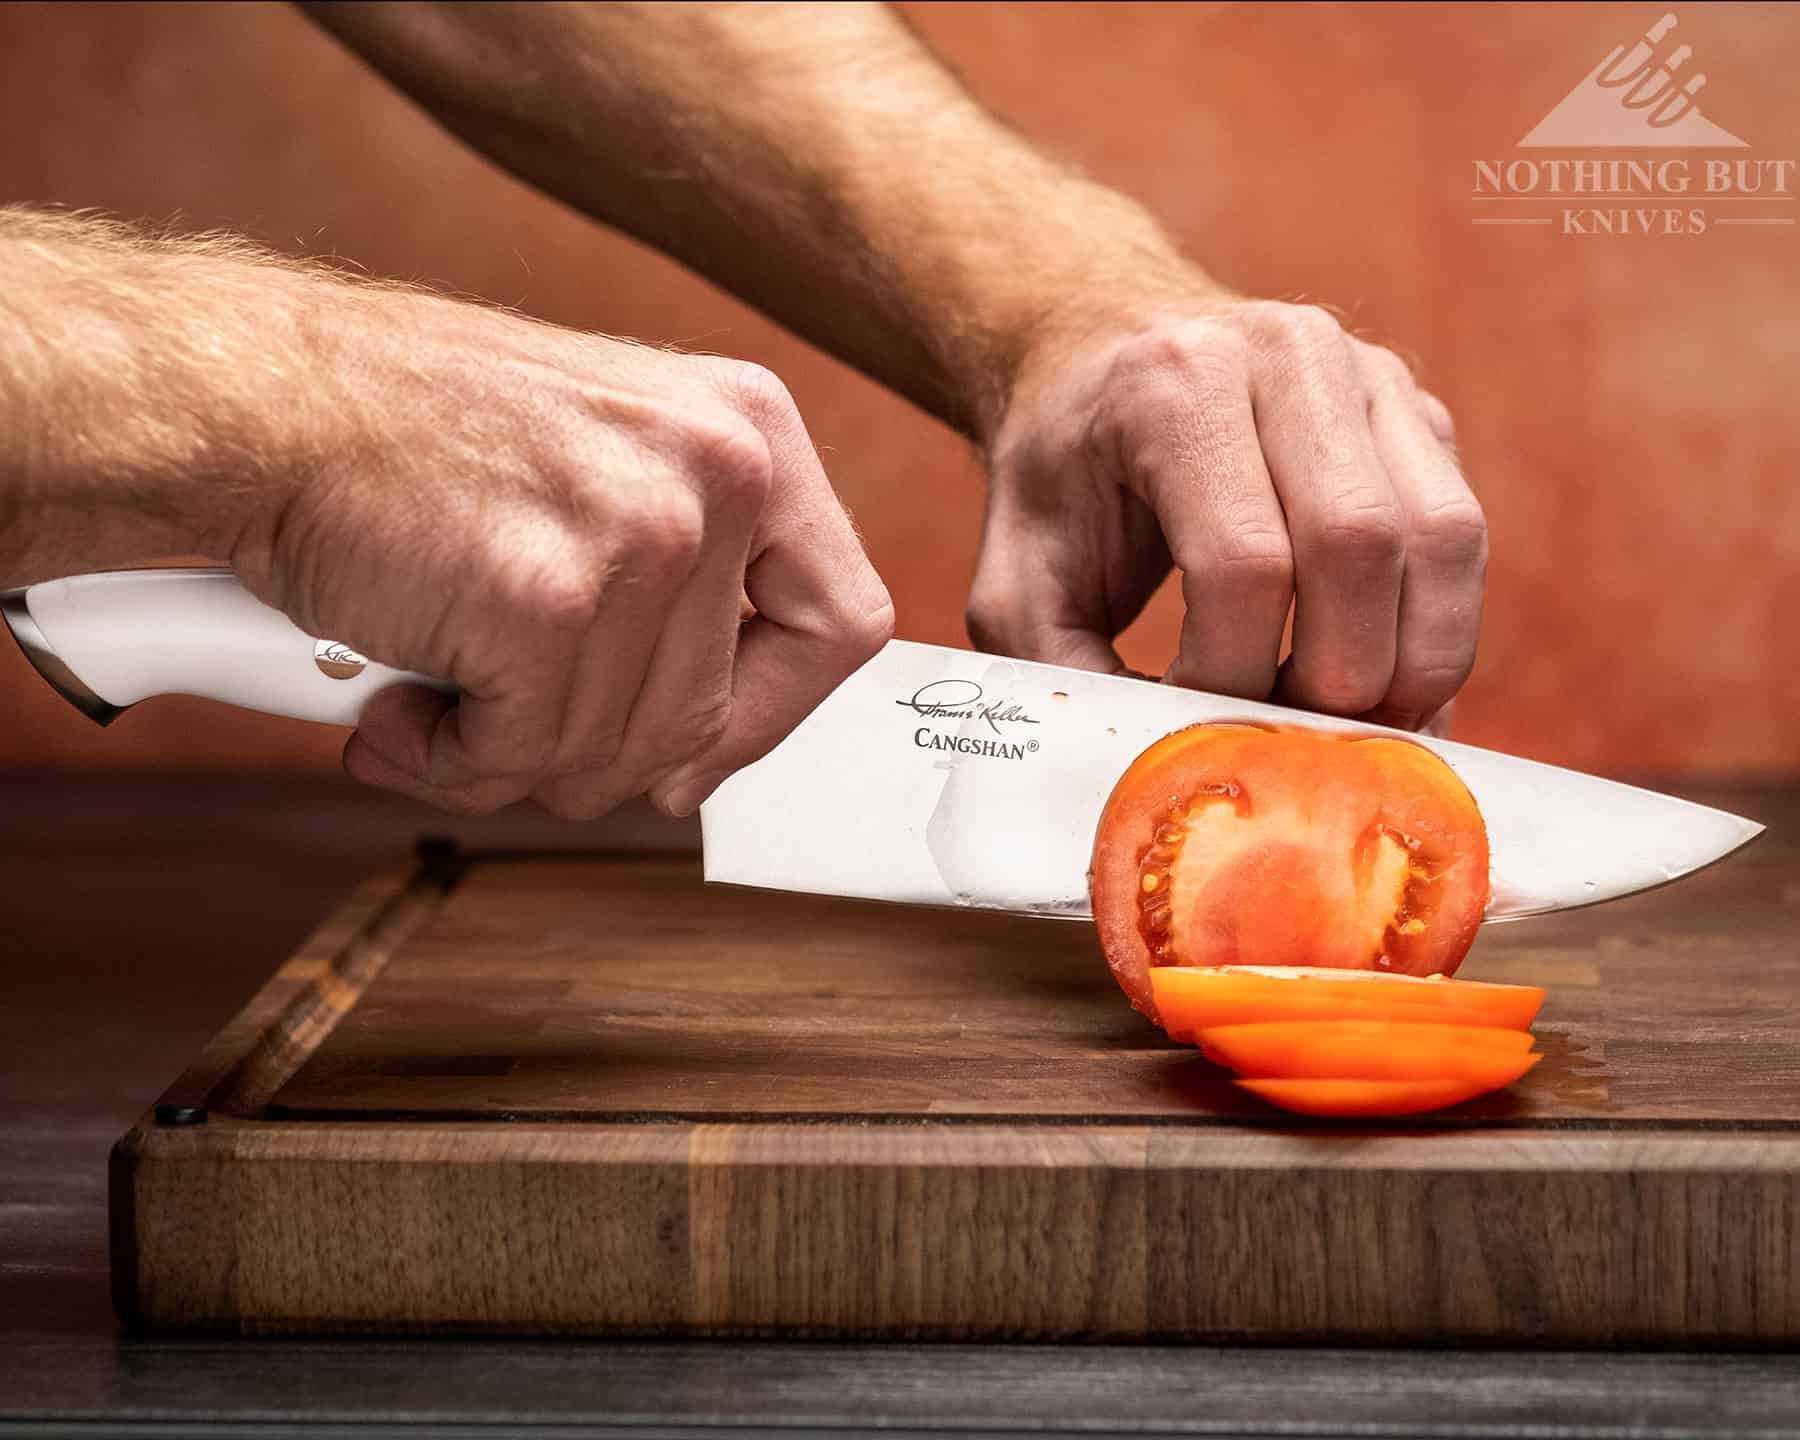 The edge of the Cangshan Thomas Keller chef knife has a good bite that cuts right into soft skins as this photo of it cutting a tomato shows.